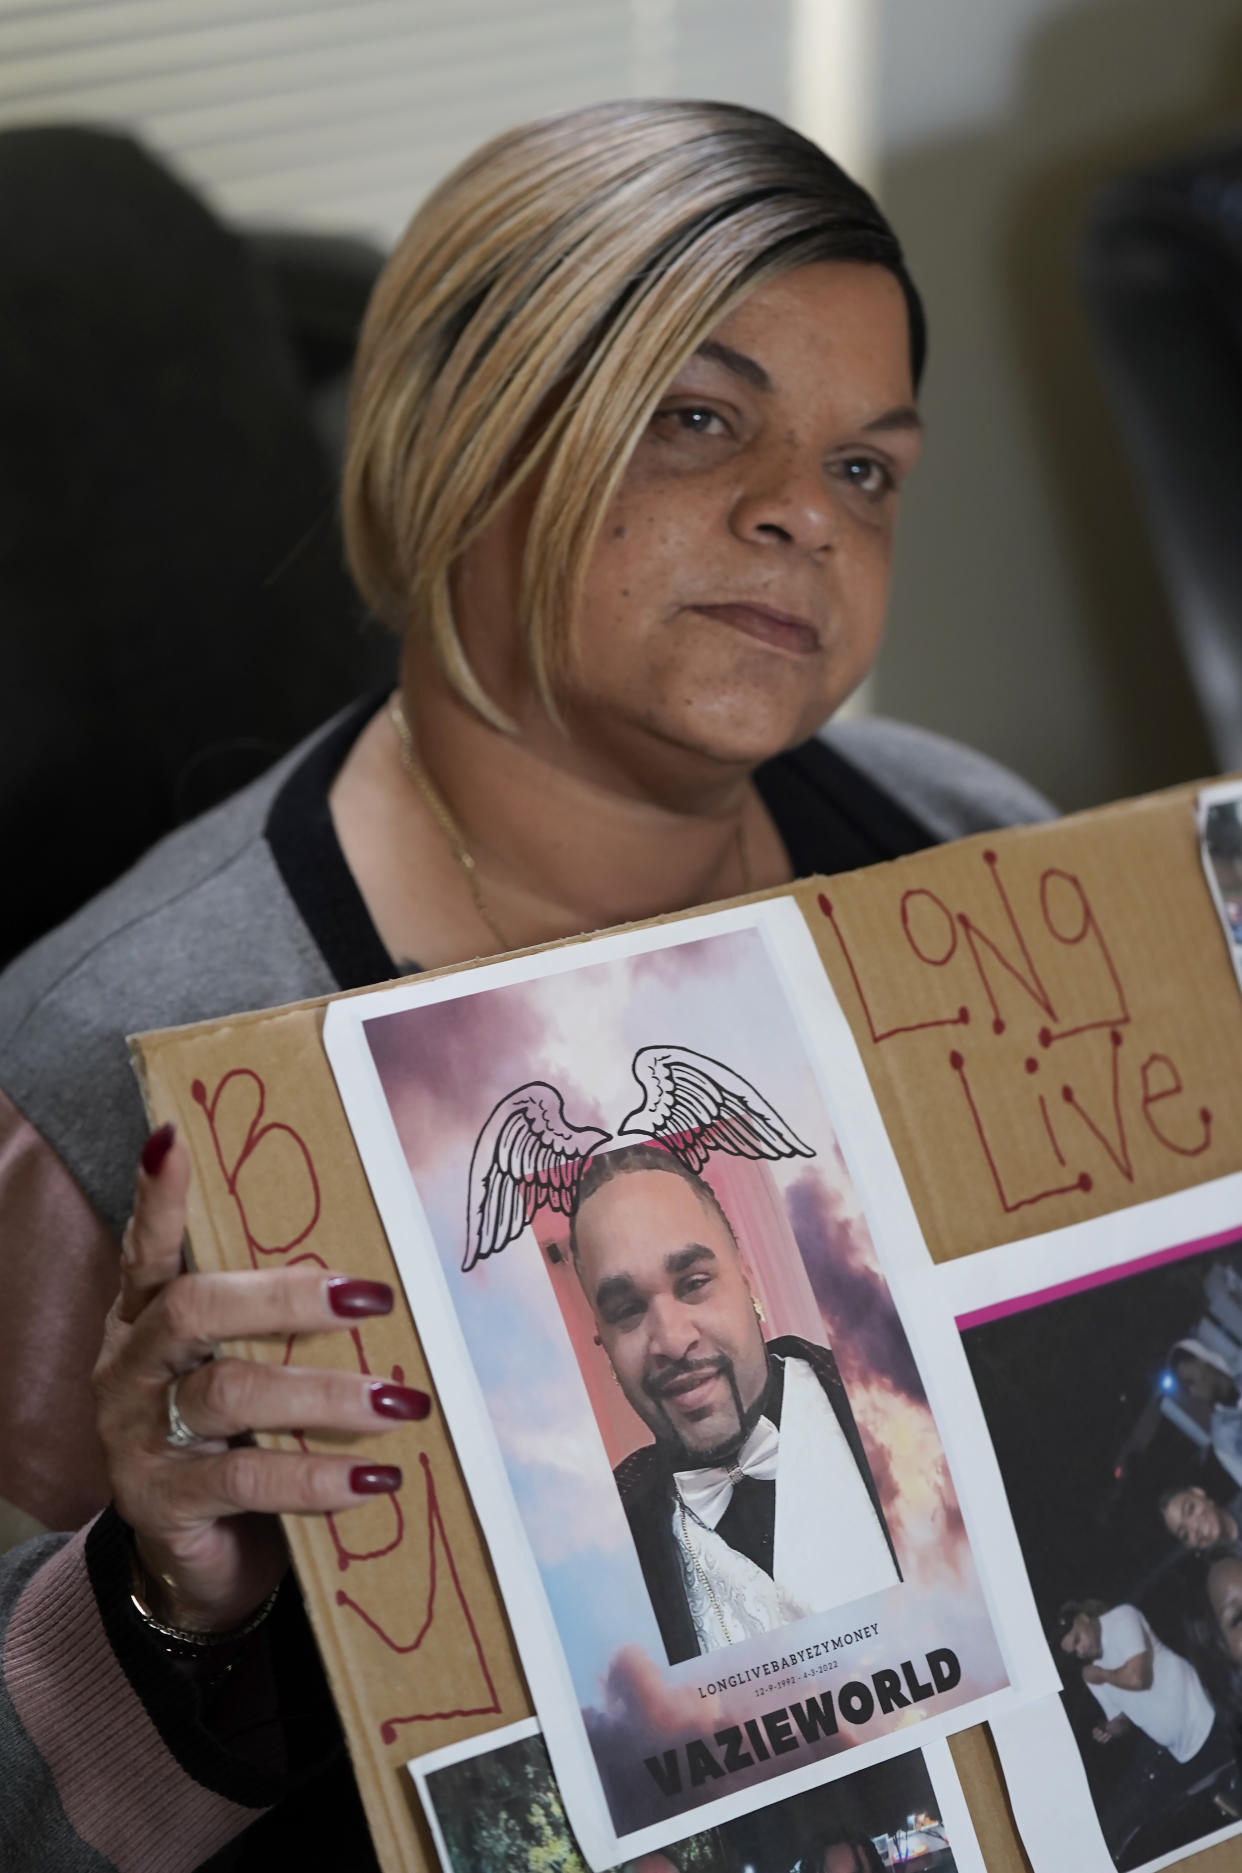 Penelope Scott holds a collection of family photos including one of her son, De'vazia Turner, one of the victims killed in a mass shooting, during an interview with The Associate Press in Elk Grove, Calif., Monday, April 4, 2022. Multiple people were killed and injured in the shooting a day earlier. (AP Photo/Rich Pedroncelli)